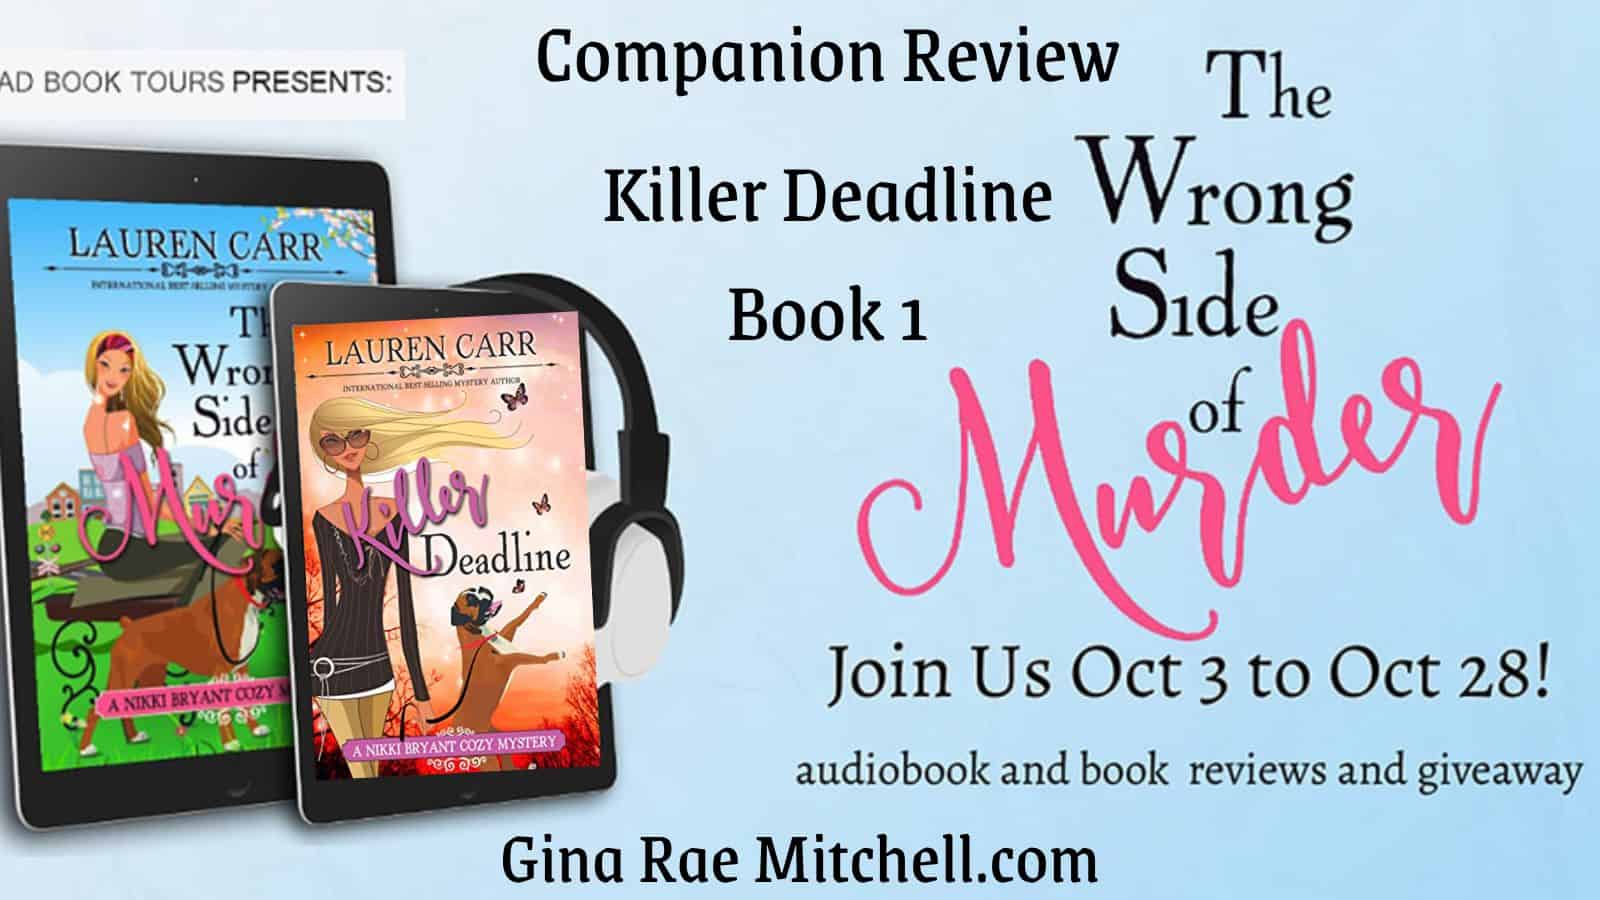 Killer Deadline by Lauren Carr ( A Nikki Bryant #CozyMystery - #1) | Book Review, $50 Paypal Giveaway